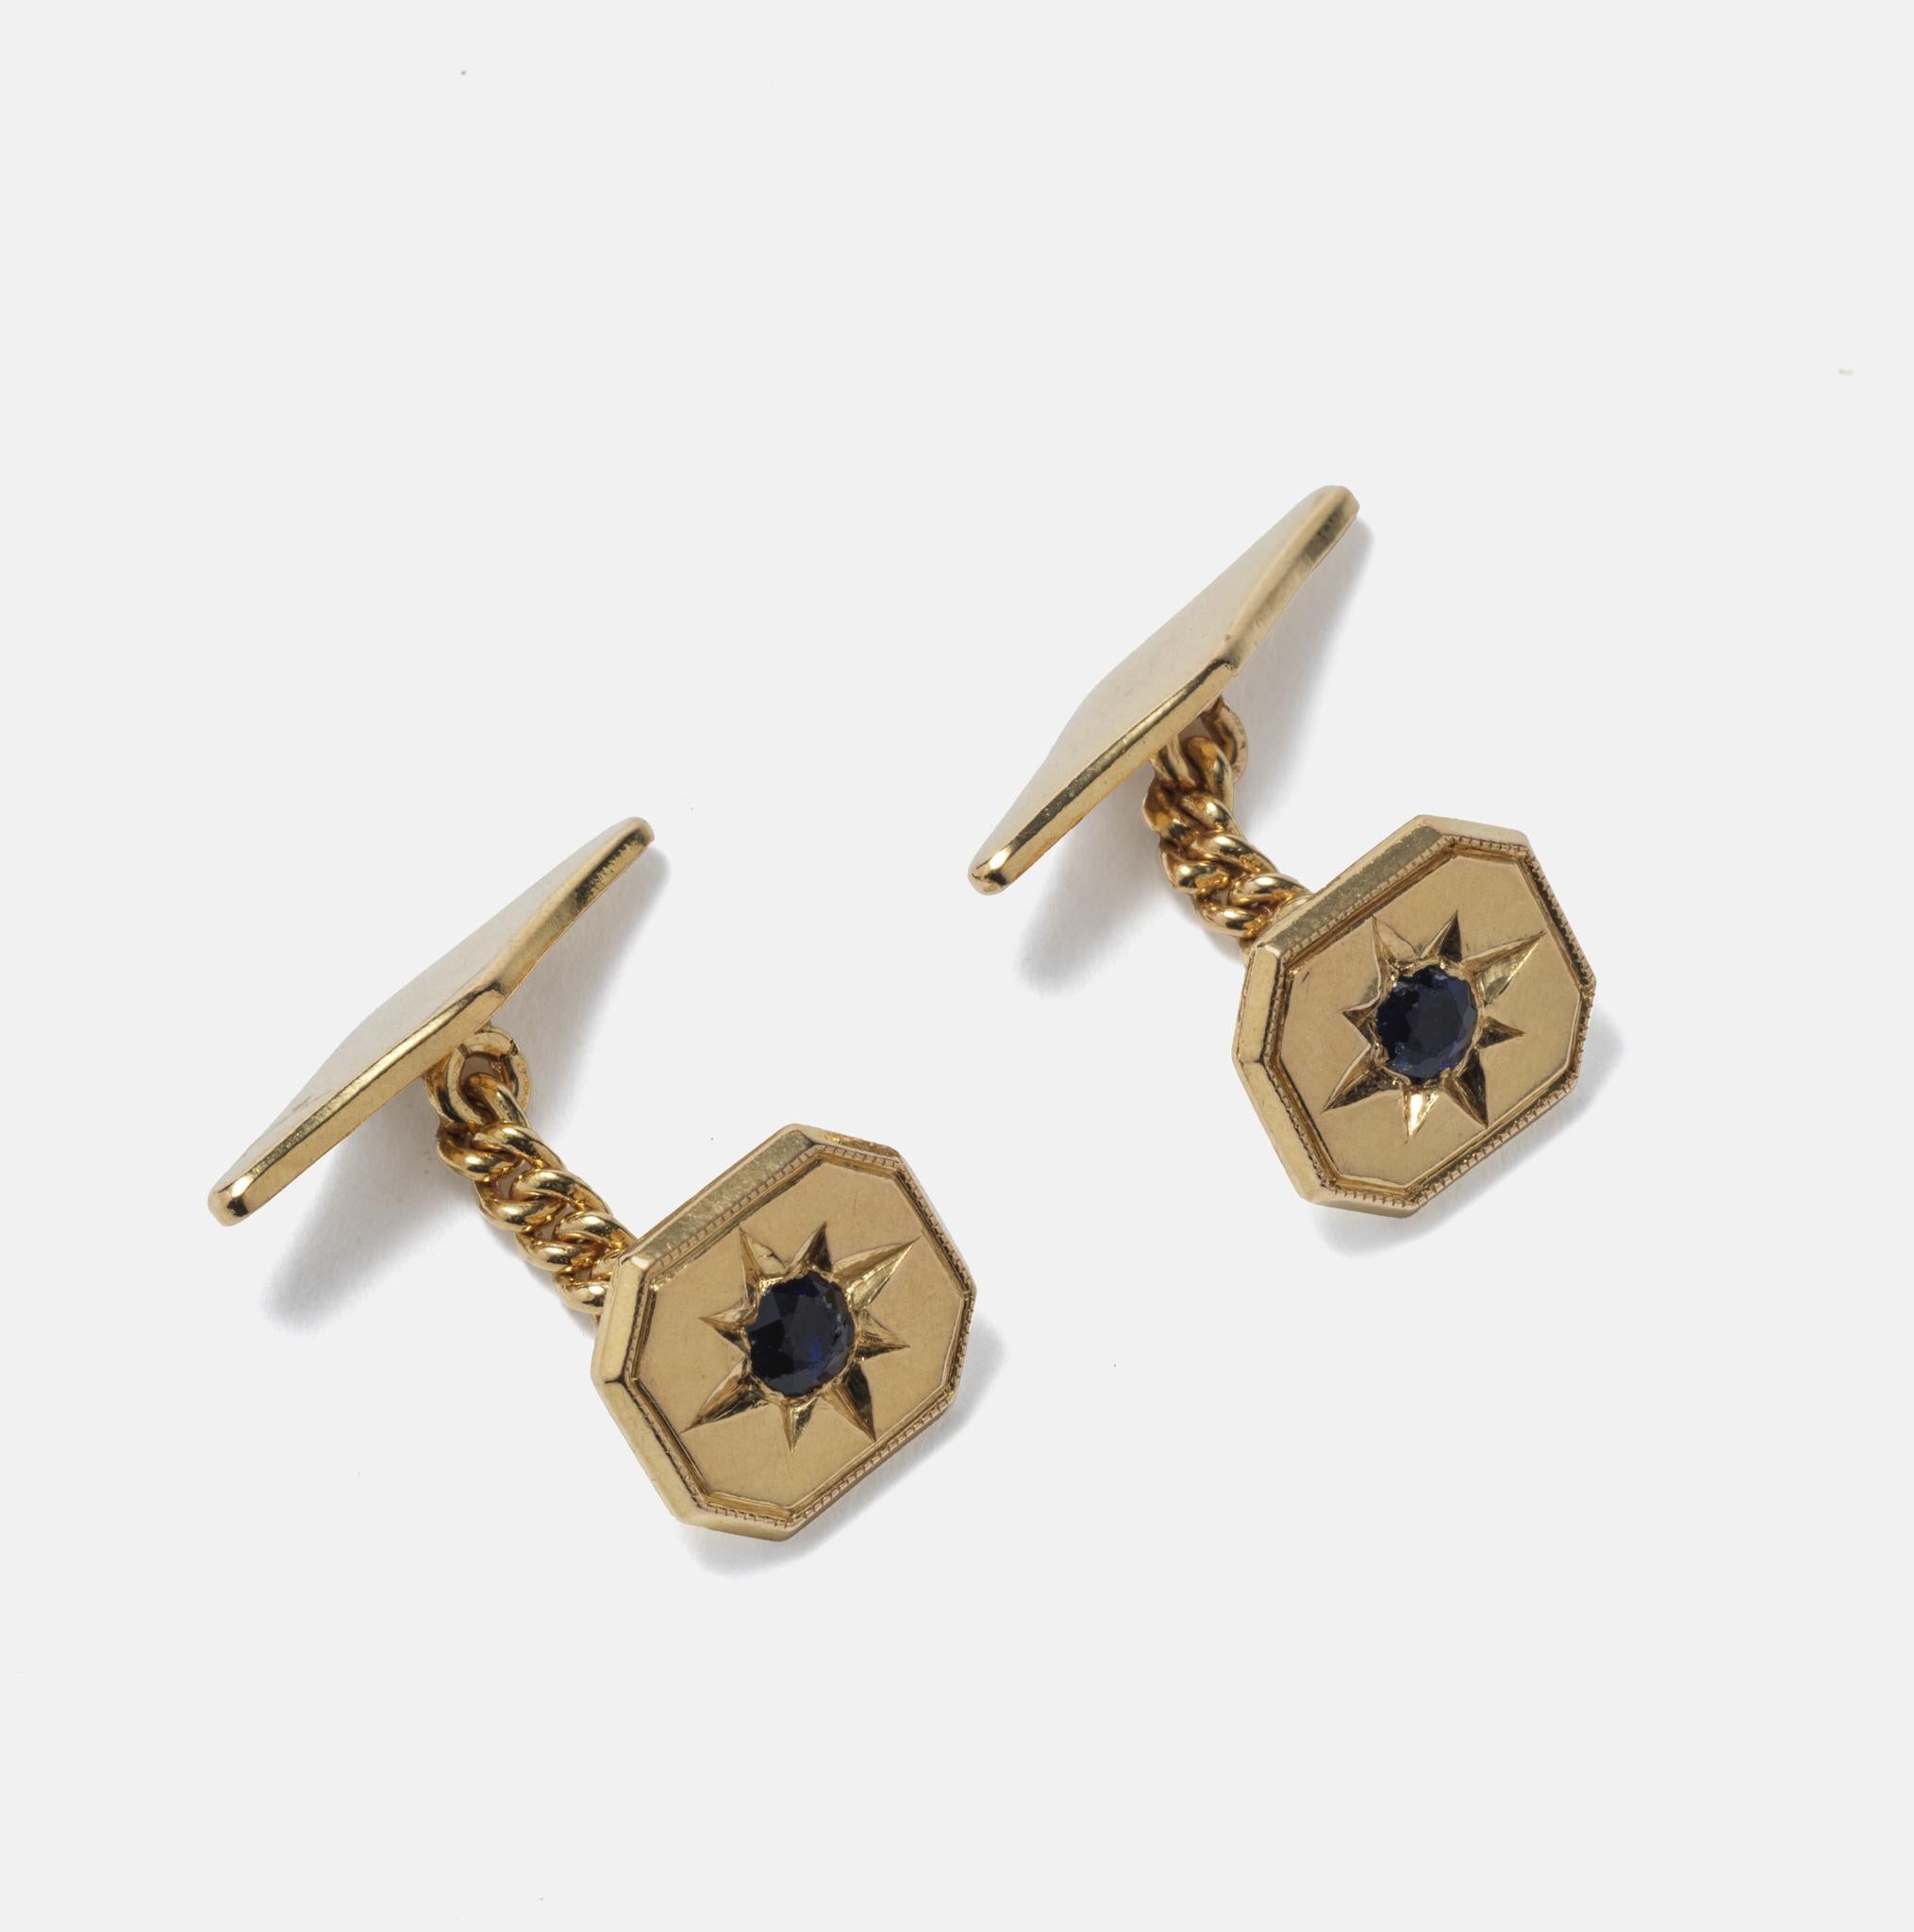 These octagonal gold cufflinks are adorned with small blue stones. They were made by the Swedish smith Sven Svan (worked 1964-1978) who was based in the north of Sweden.